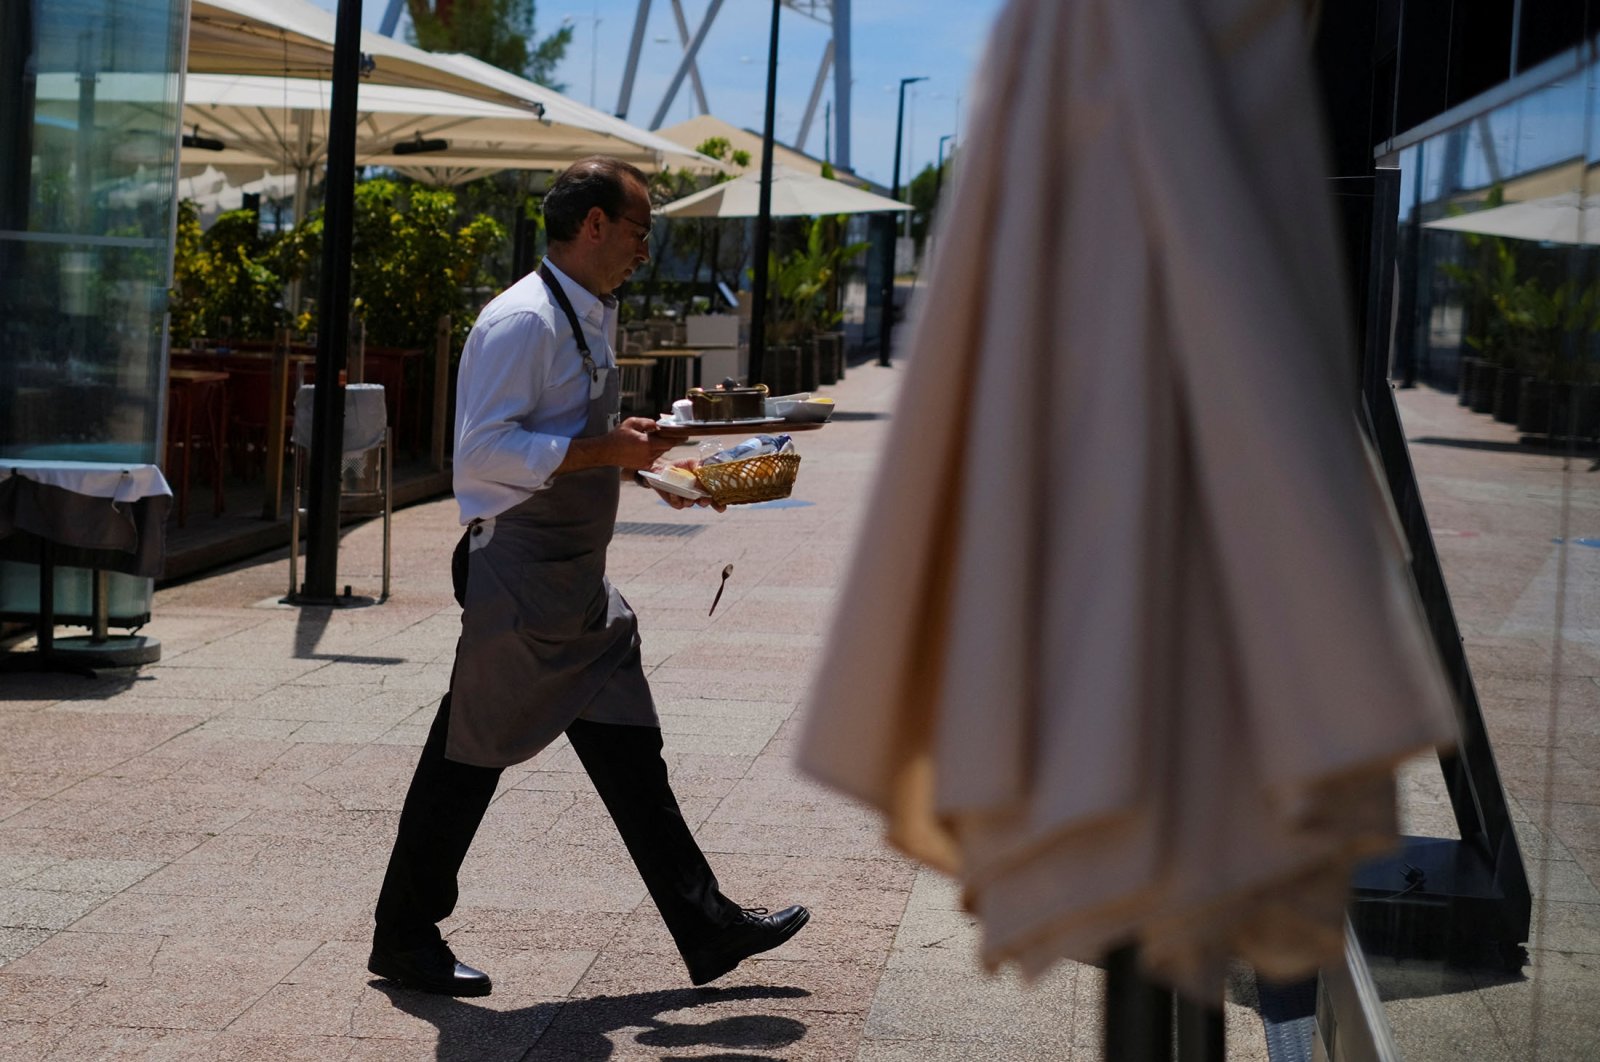 A waiter clears the table in a restaurant in Lisbon, Portugal, June 6, 2022. (Reuters Photo)